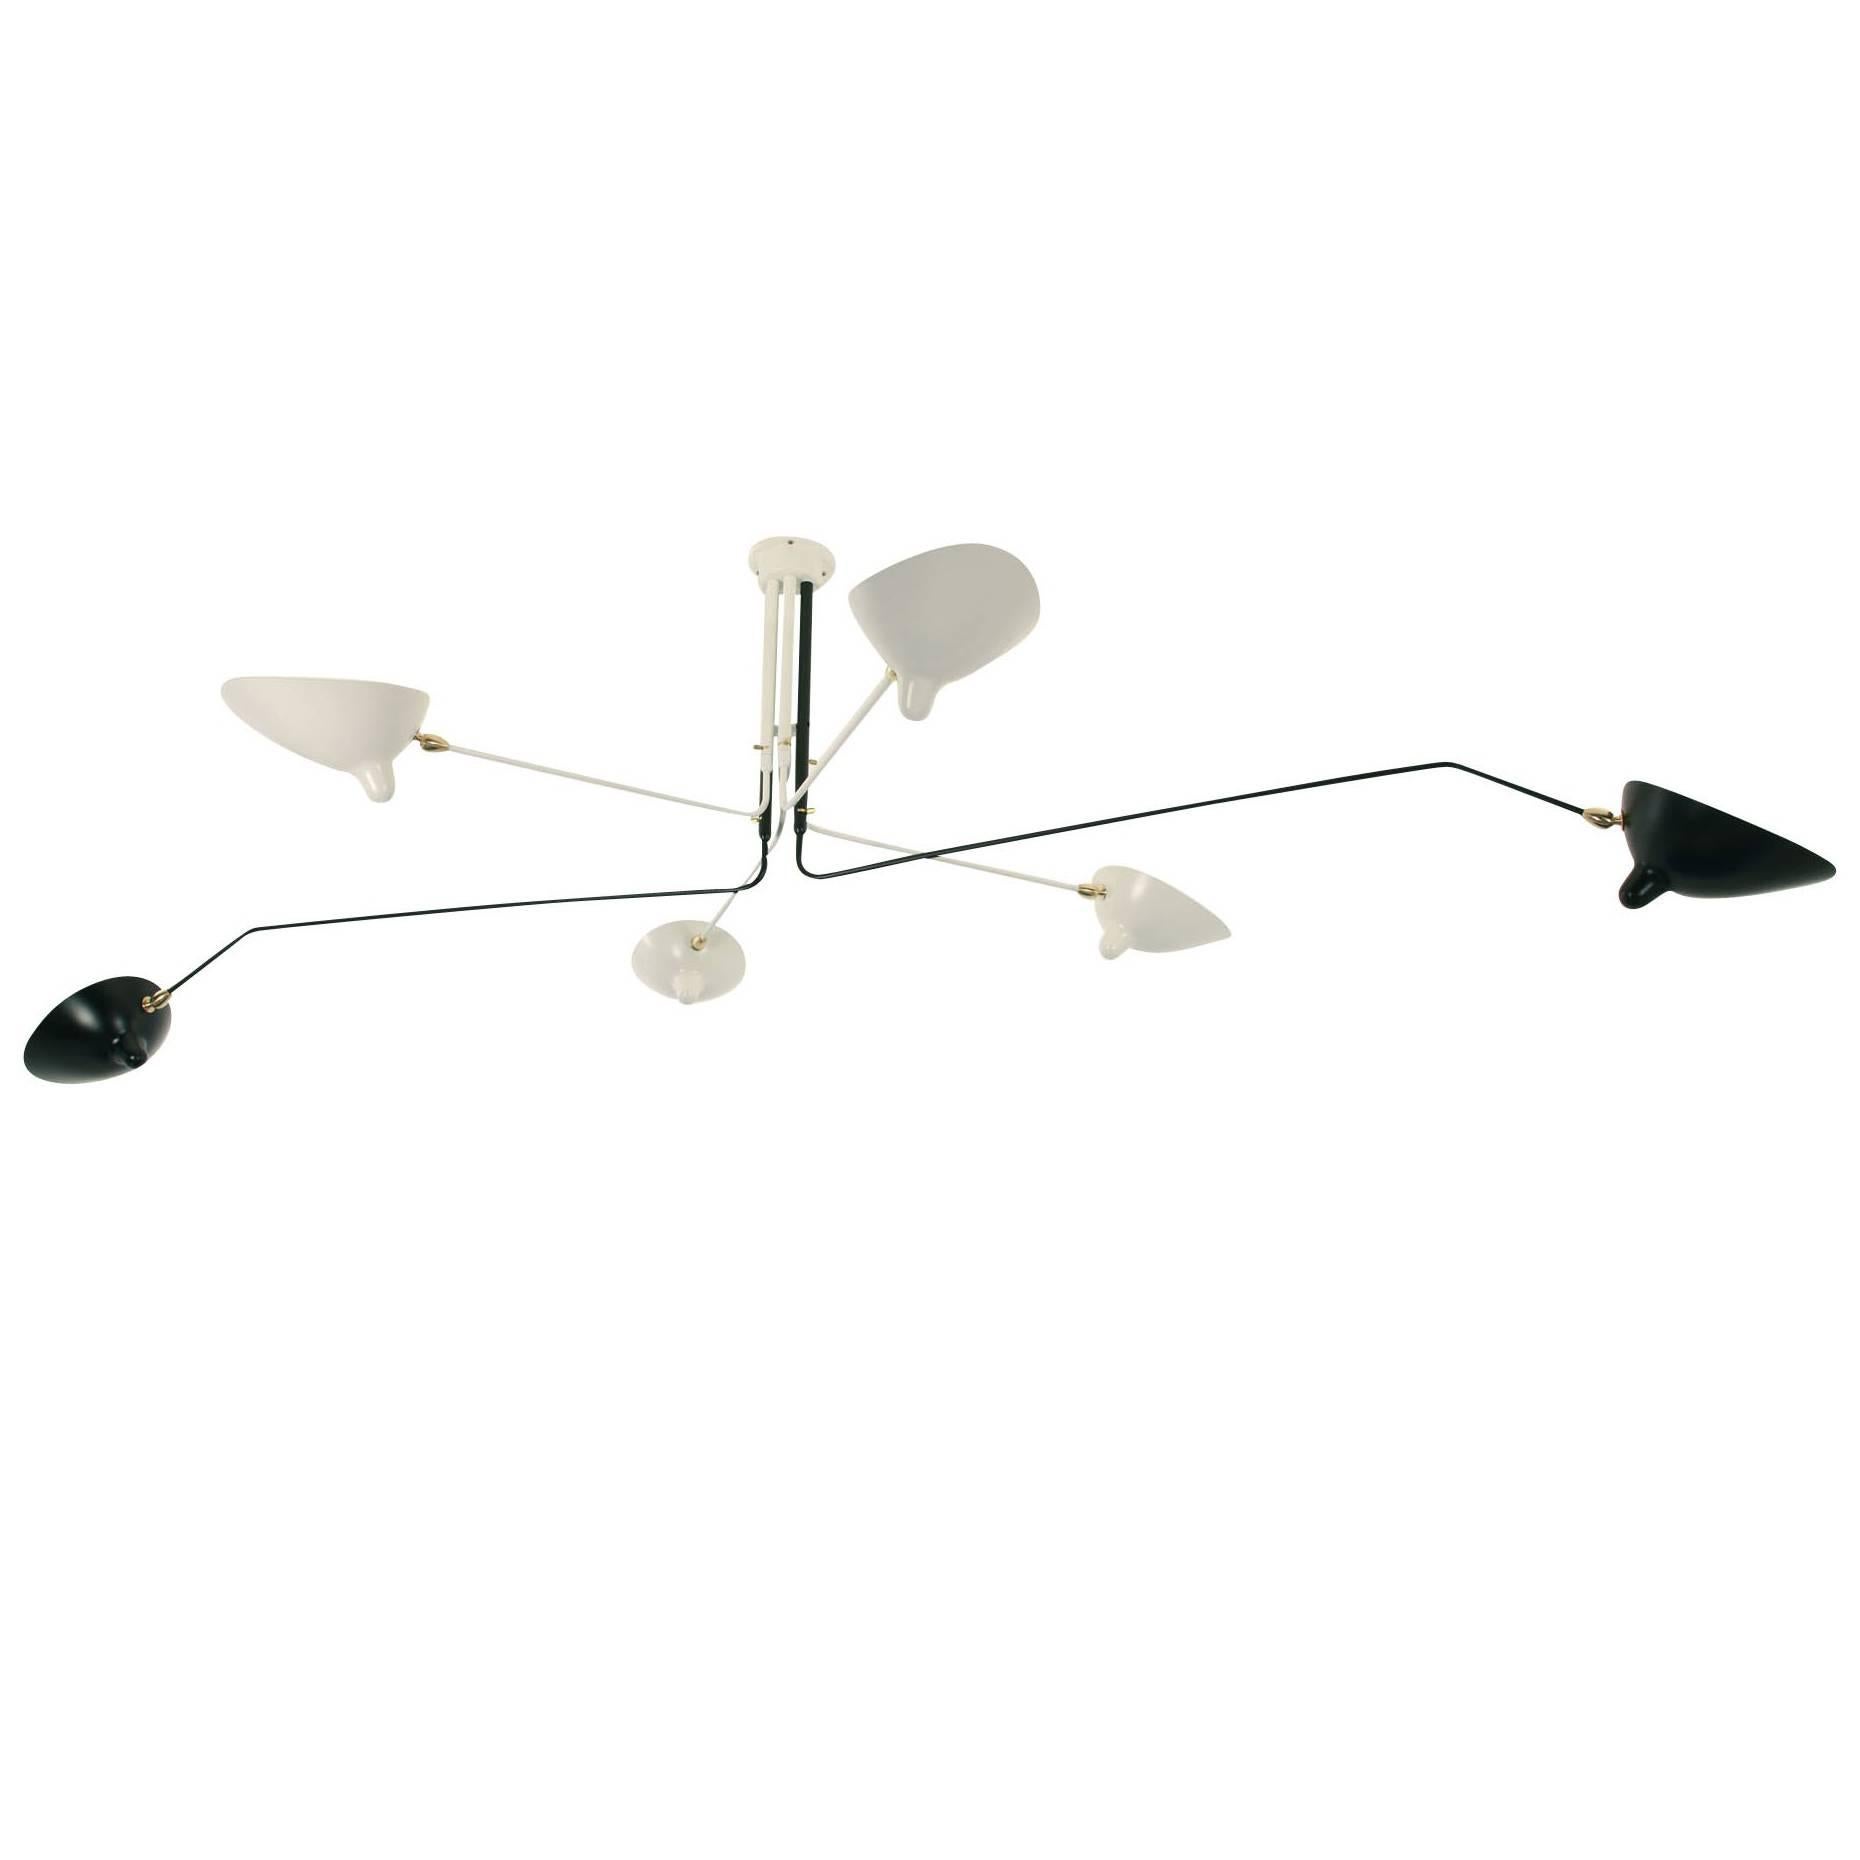 Serge Mouille Six Rotating Black and White Arms Ceiling Sconce Lamp